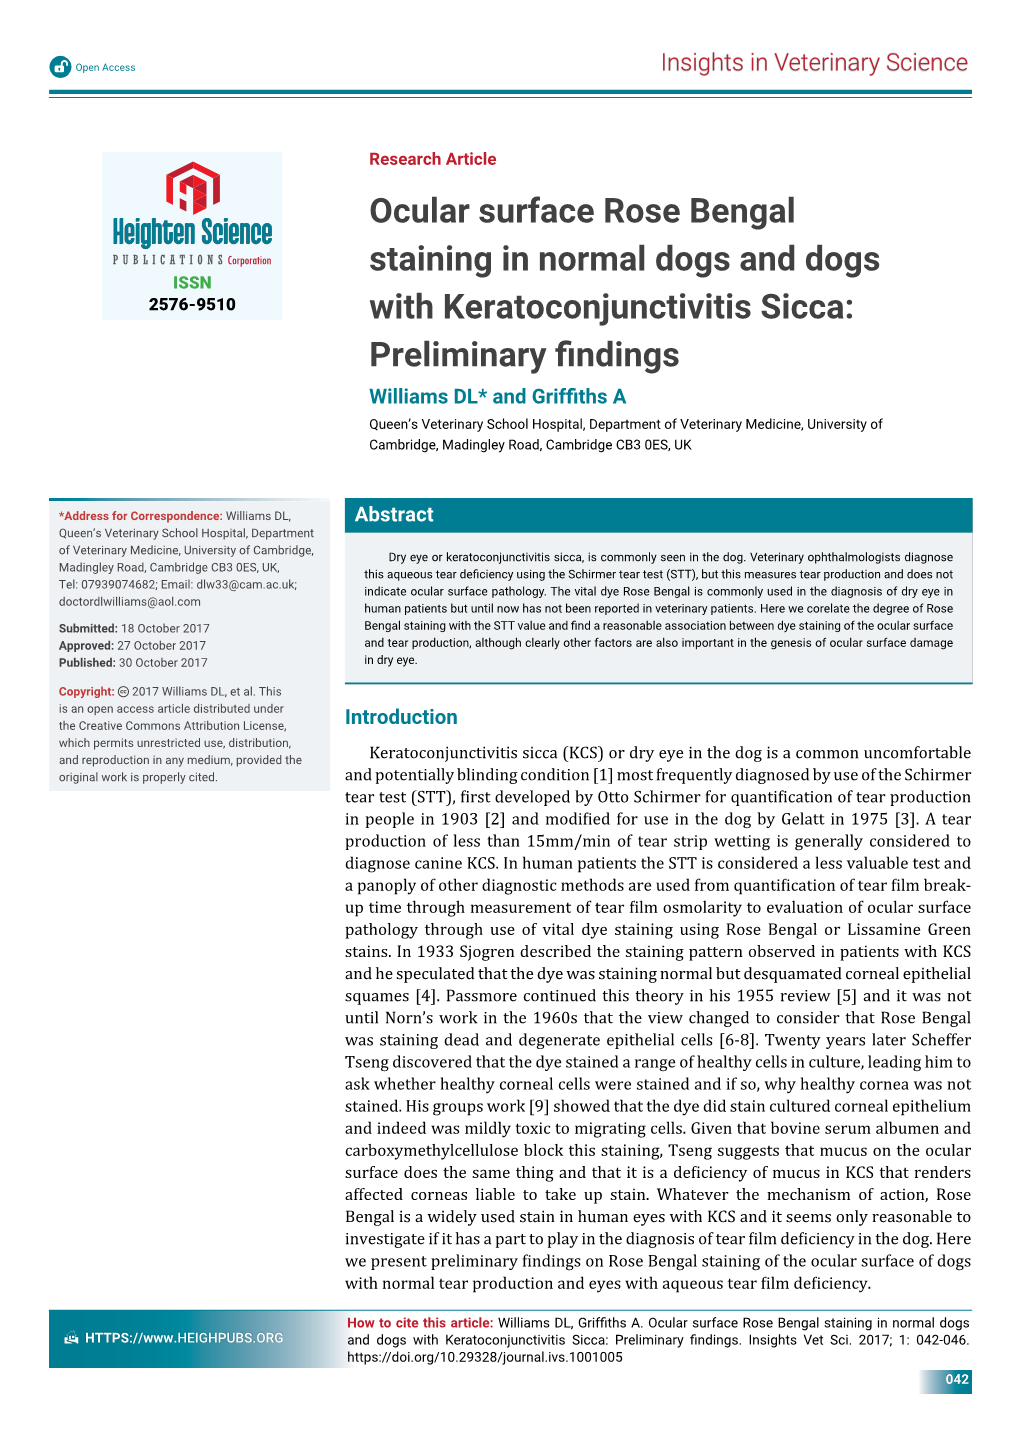 Ocular Surface Rose Bengal Staining in Normal Dogs and Dogs with Keratoconjunctivitis Sicca: Preliminary ﬁ Ndings